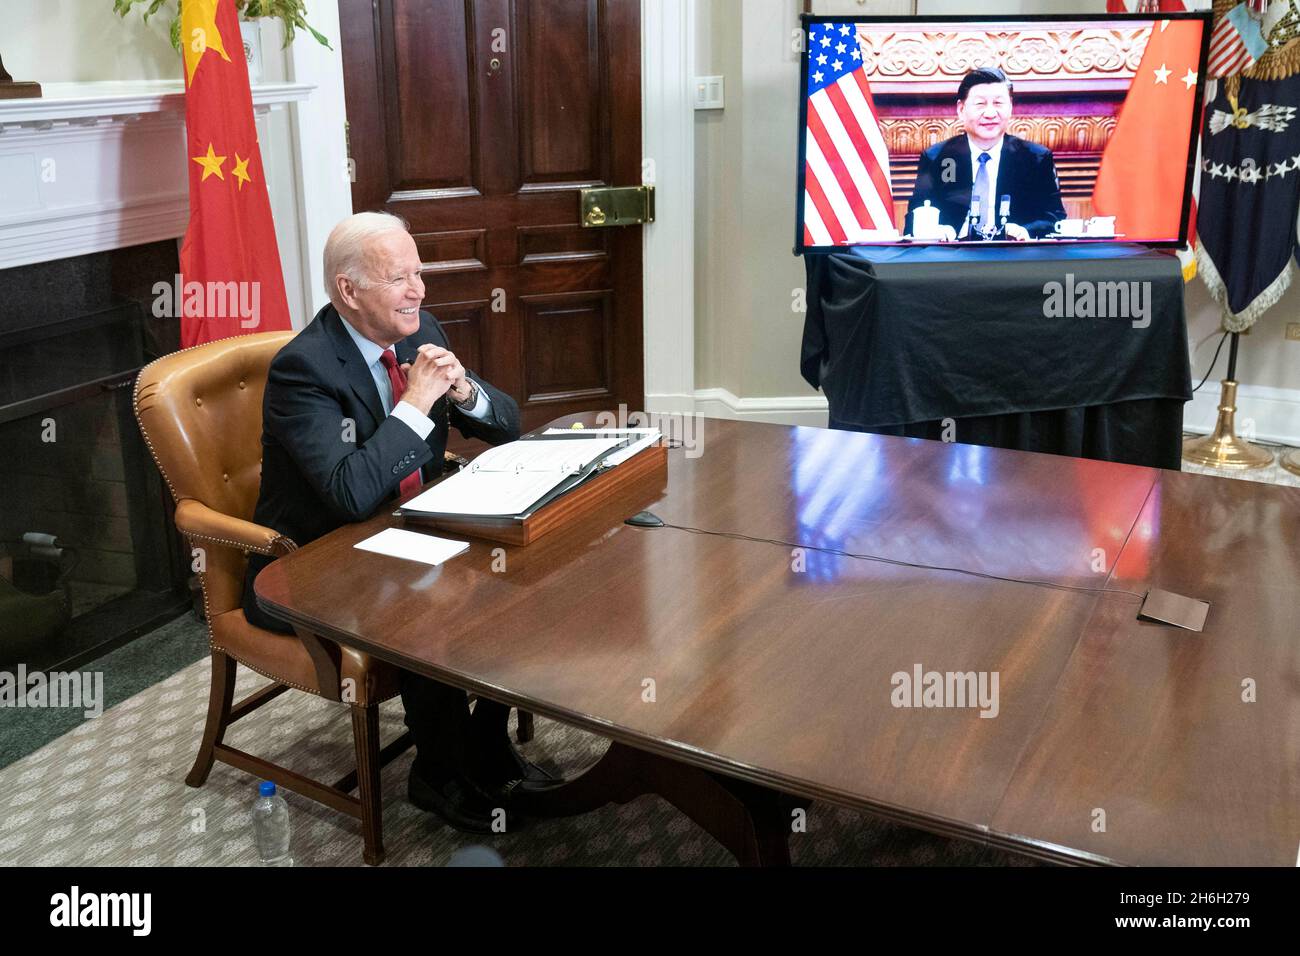 President Joe Biden speaks during a virtual summit with Chinese President Xi Jinping in the Roosevelt Room of the White House in Washington DC on Monday, November 15, 2021. Photo by Sarah Silbiger/Pool/ABACAPRESS.COM Stock Photo